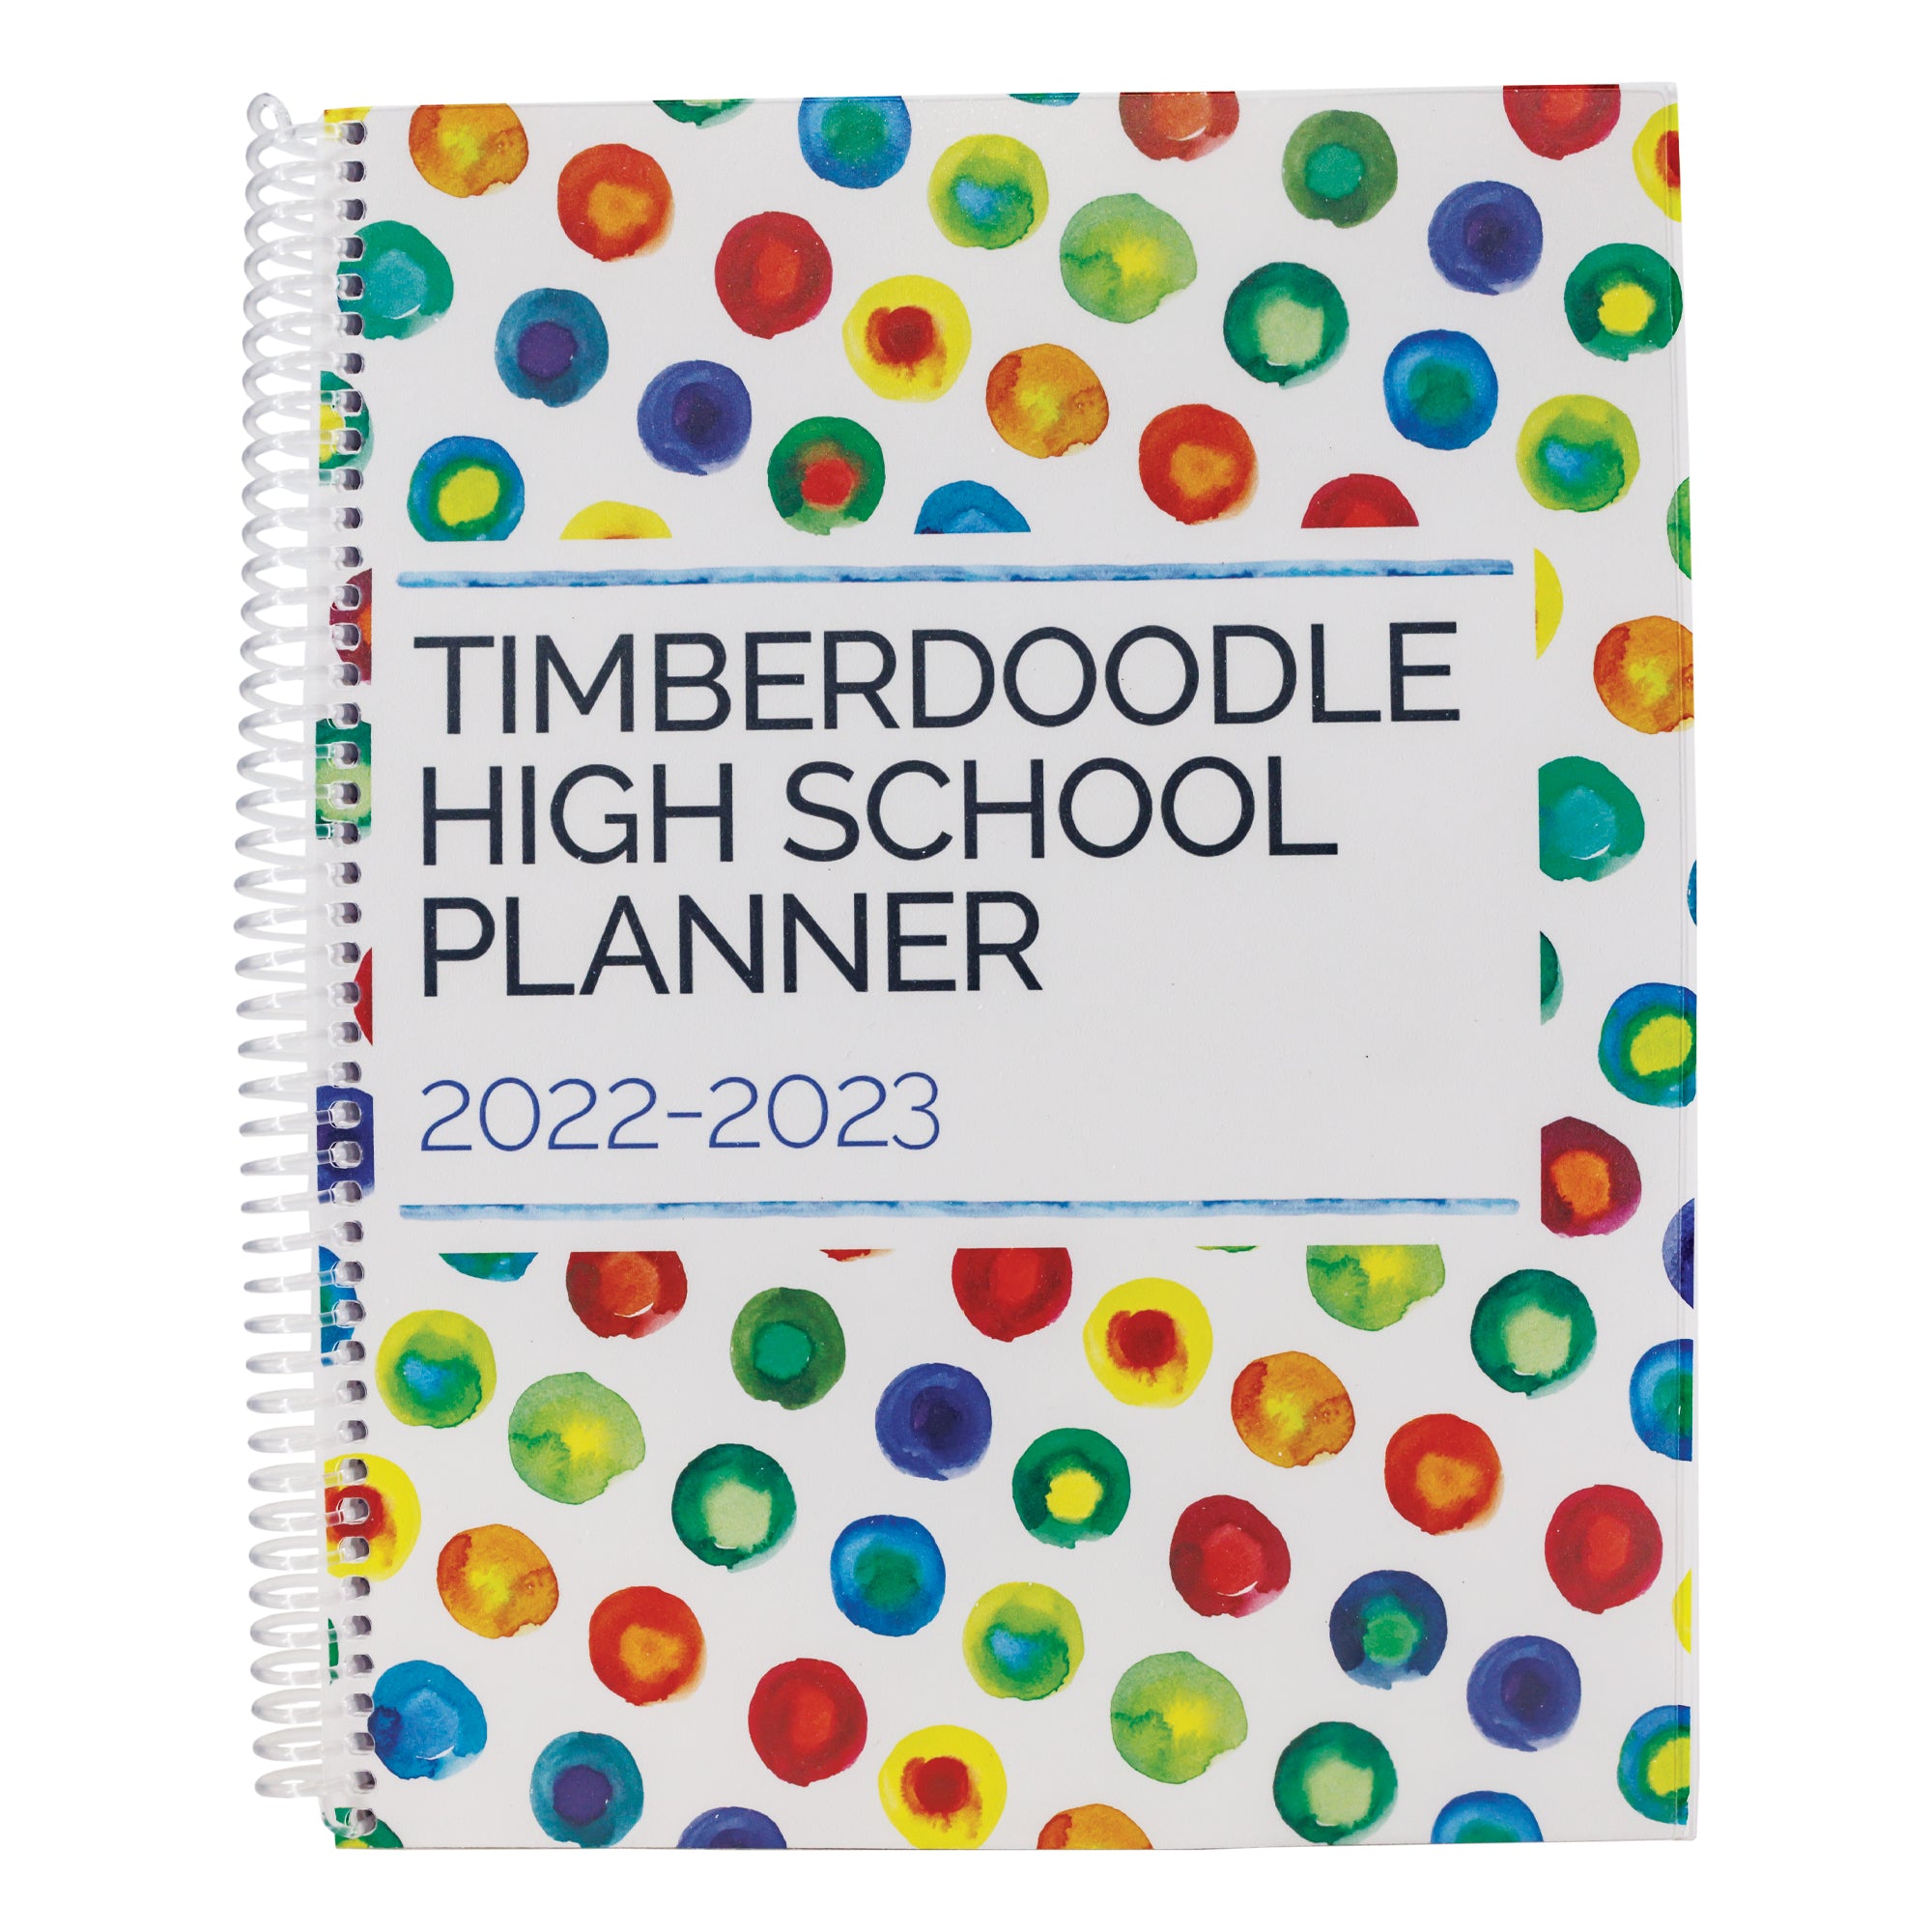 The Timberdoodle 2022 to 2023 High School Planner. The cover has a water colored dot pattern in the background. Each dot is a different color, with a different colored center. There is a large white rectangle in the middle with the title and school year. It has a white spiral binding.